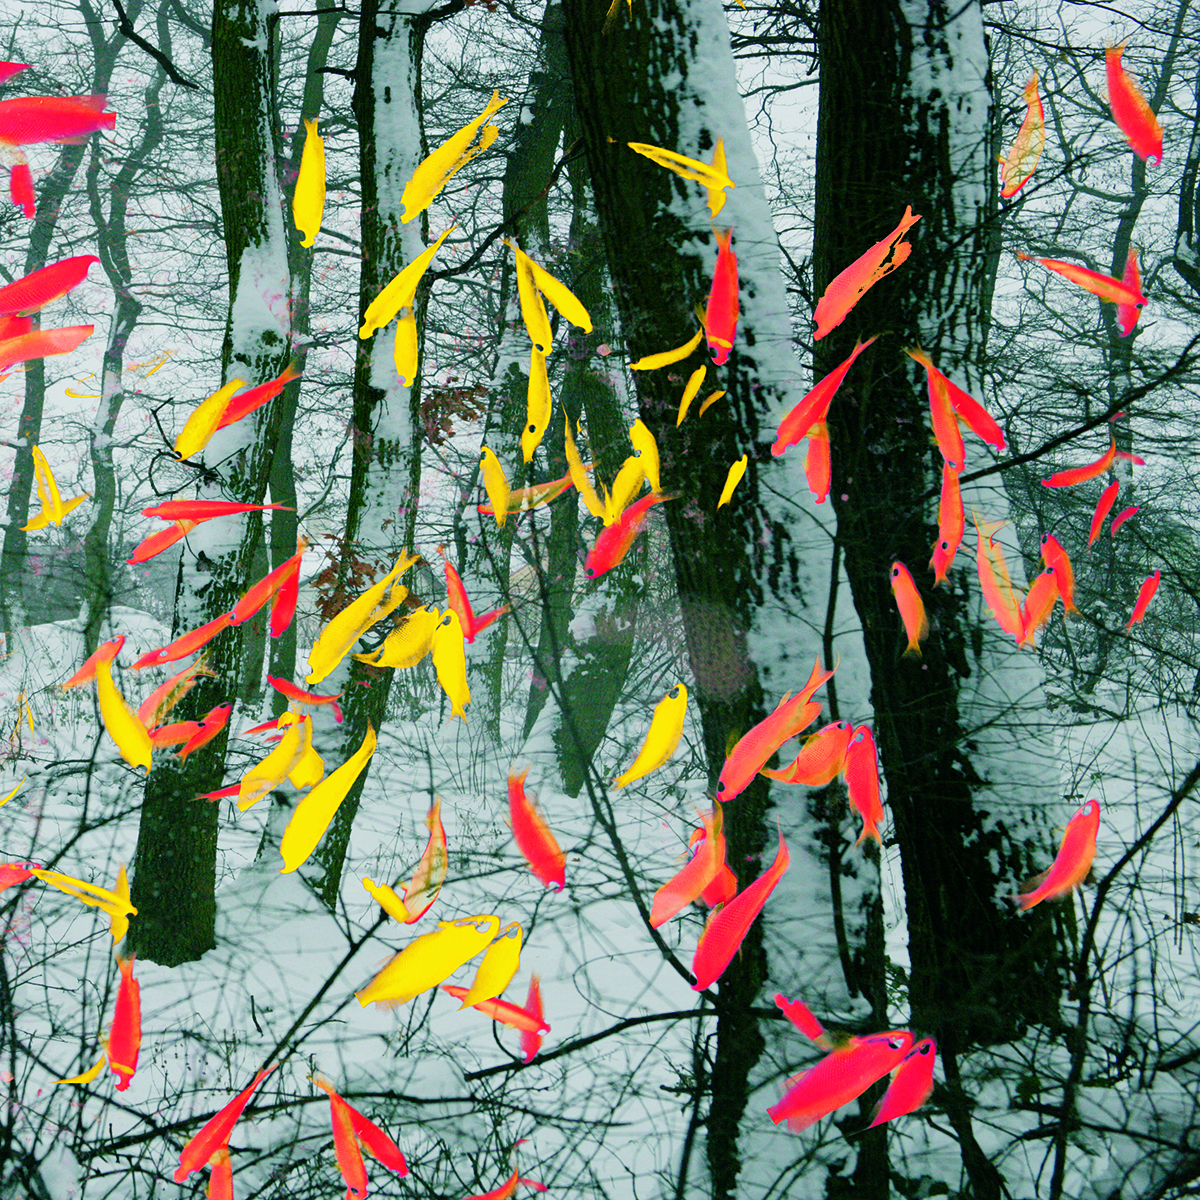 Fishes in the woods/ Ryby v lese